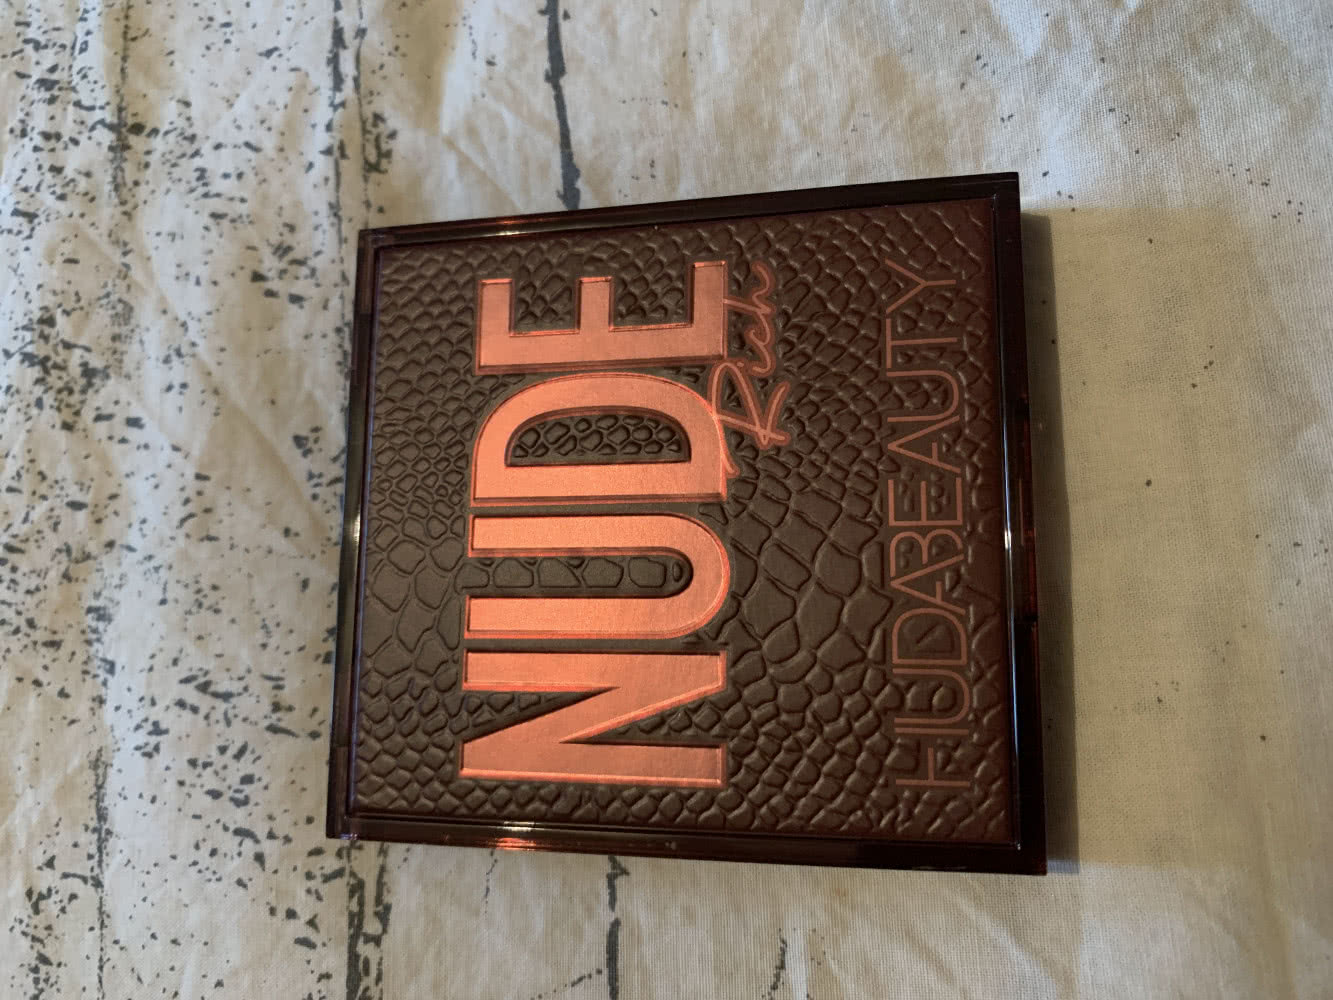 Huda Beauty, Nude Rich Obsessions